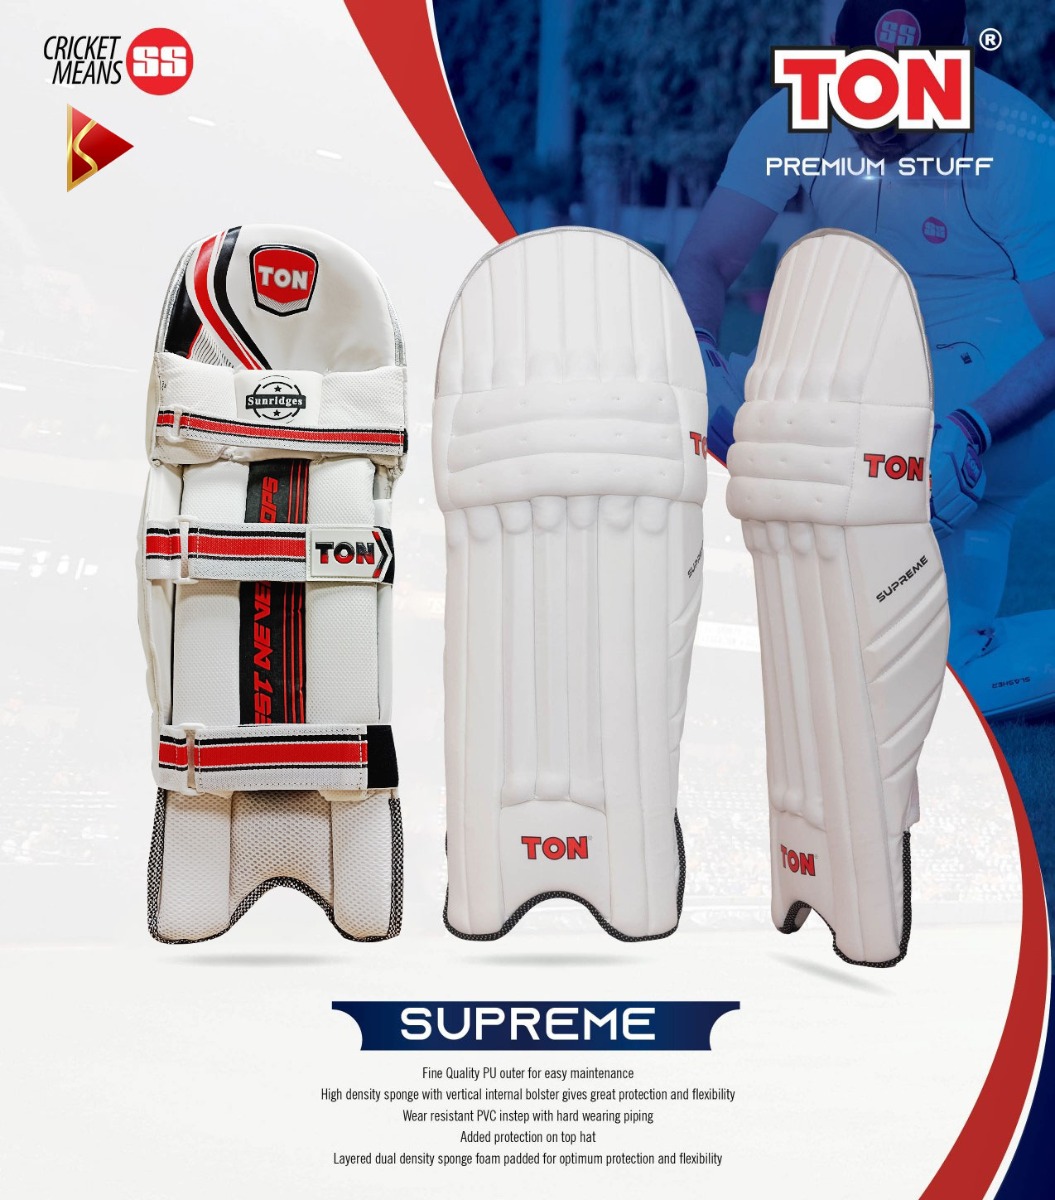 SS Ton Supreme Batting Pads Features